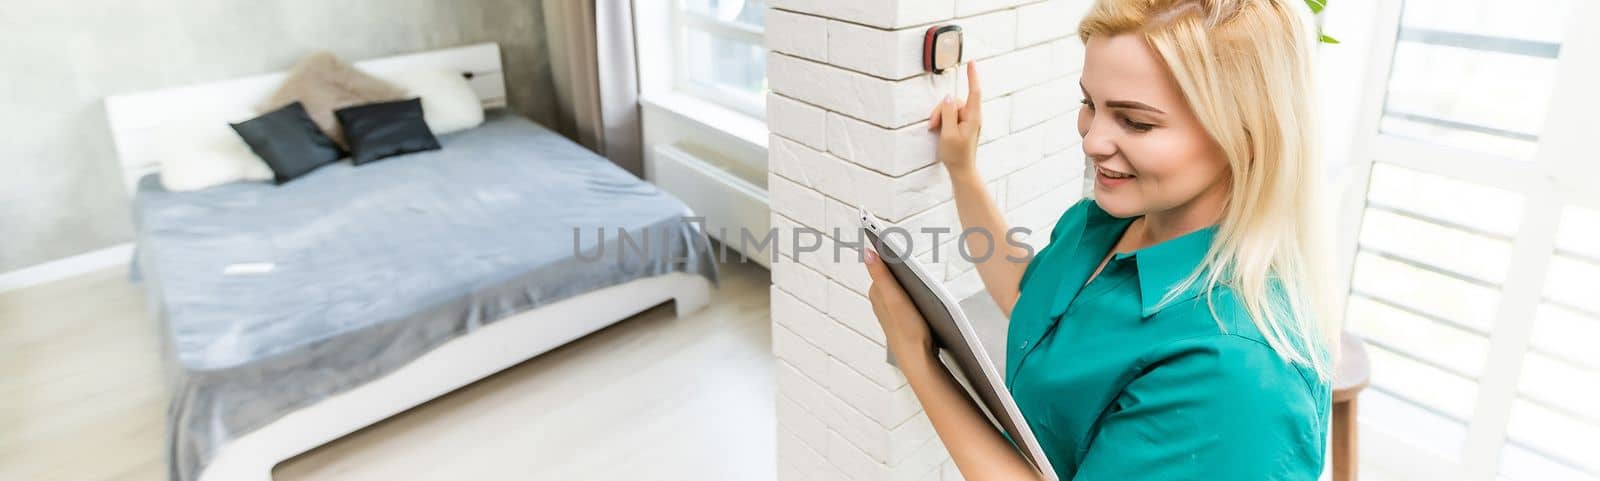 Smiling Woman Adjusting Thermostat On Home Heating System.